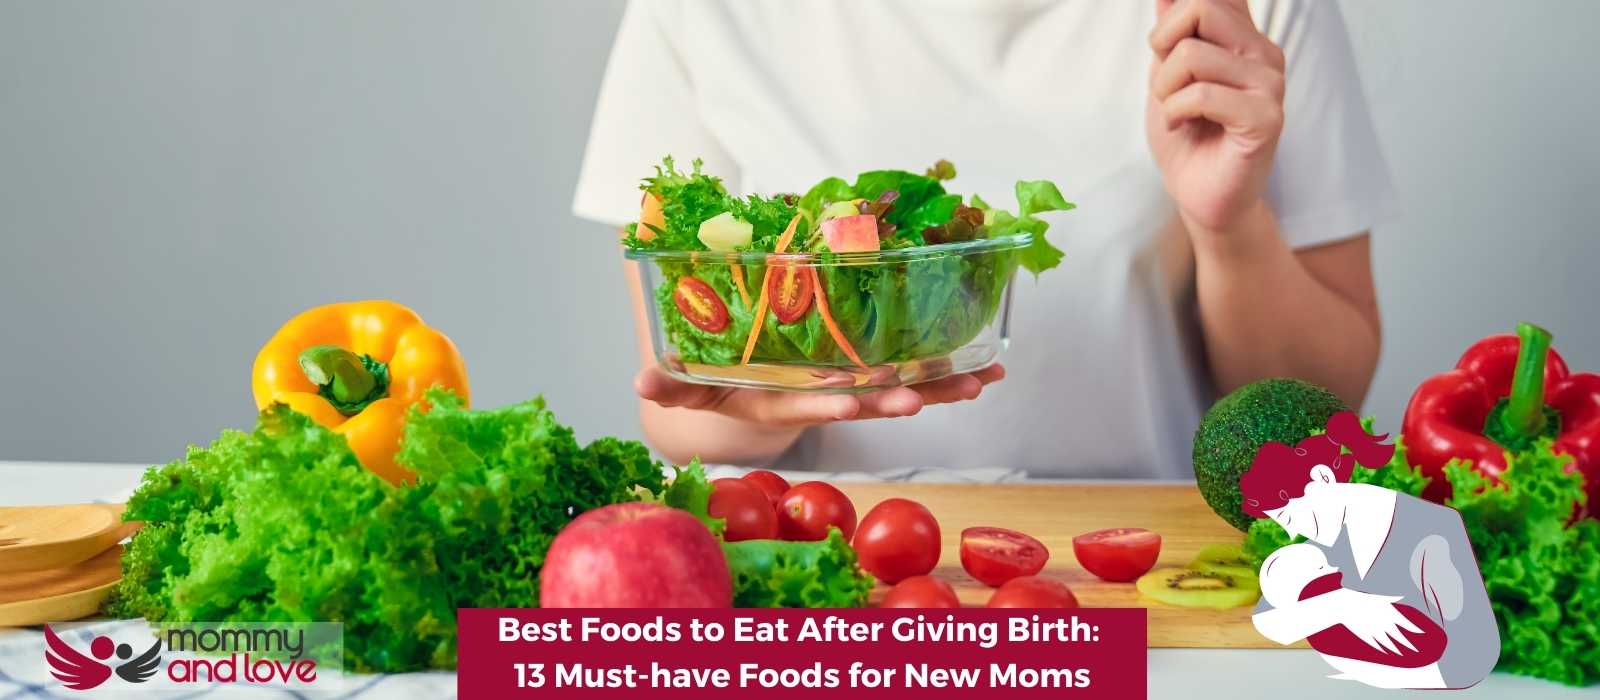 Best Foods to Eat After Giving Birth 13 Must-have Foods for New Moms